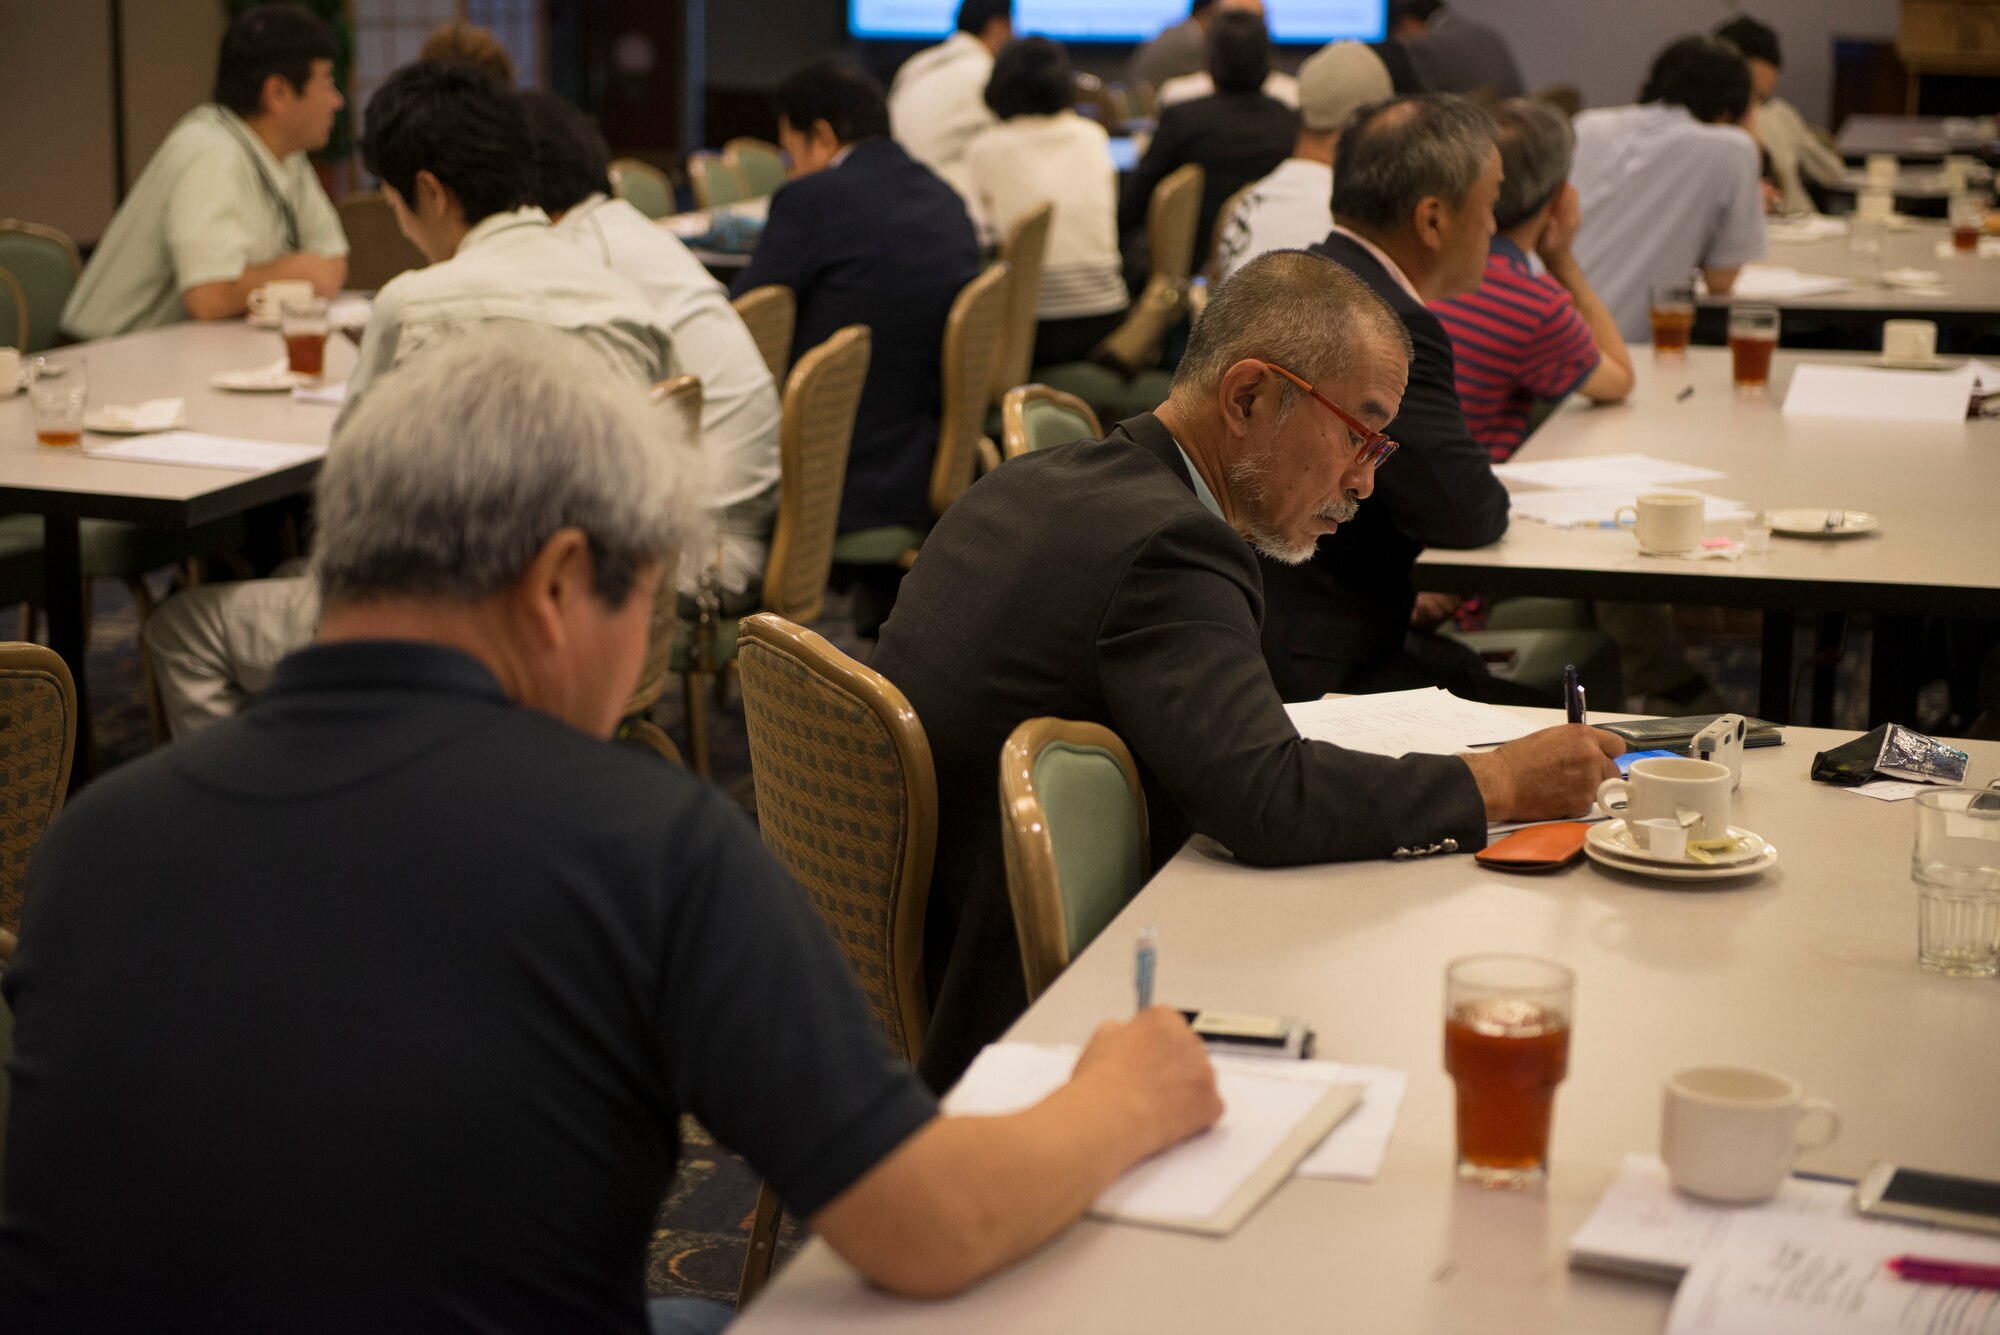 Representatives from local businesses take notes during a Vendor Fair at Yokota Air Base, Japan, June 10, 2015.  More than 90 participants from 70 businesses came to the event to learn more about working with the U.S. government. (U.S. Air Force photo by Staff Sgt. Cody H. Ramirez/Released)